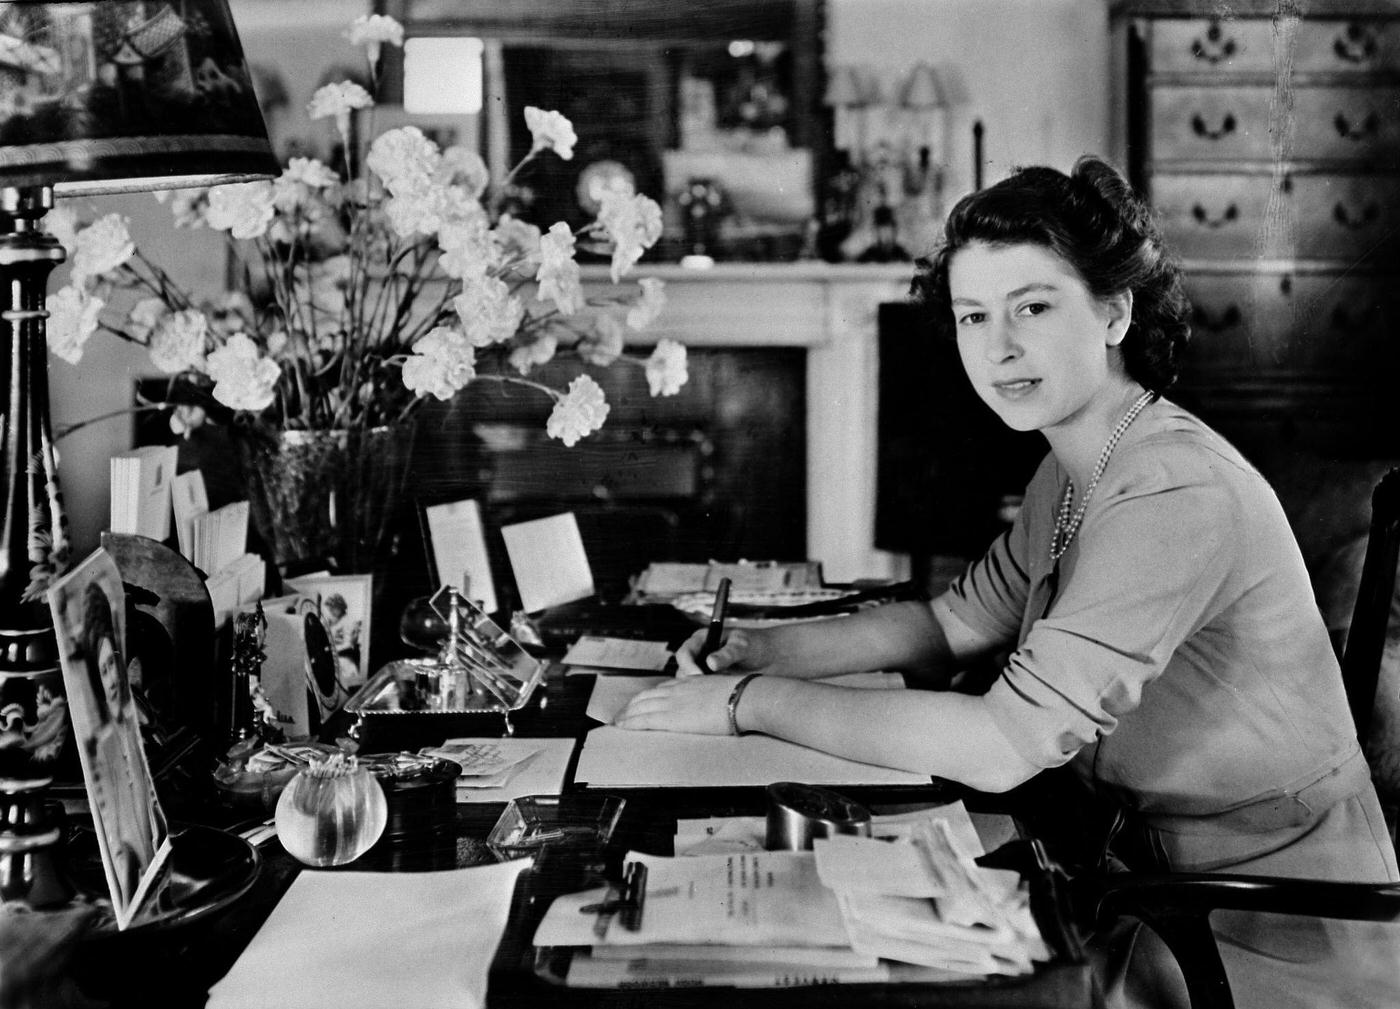 Princess Elizabeth pictured at the desk in her sitting room at Buckingham Palace, London, England, circa 1947.